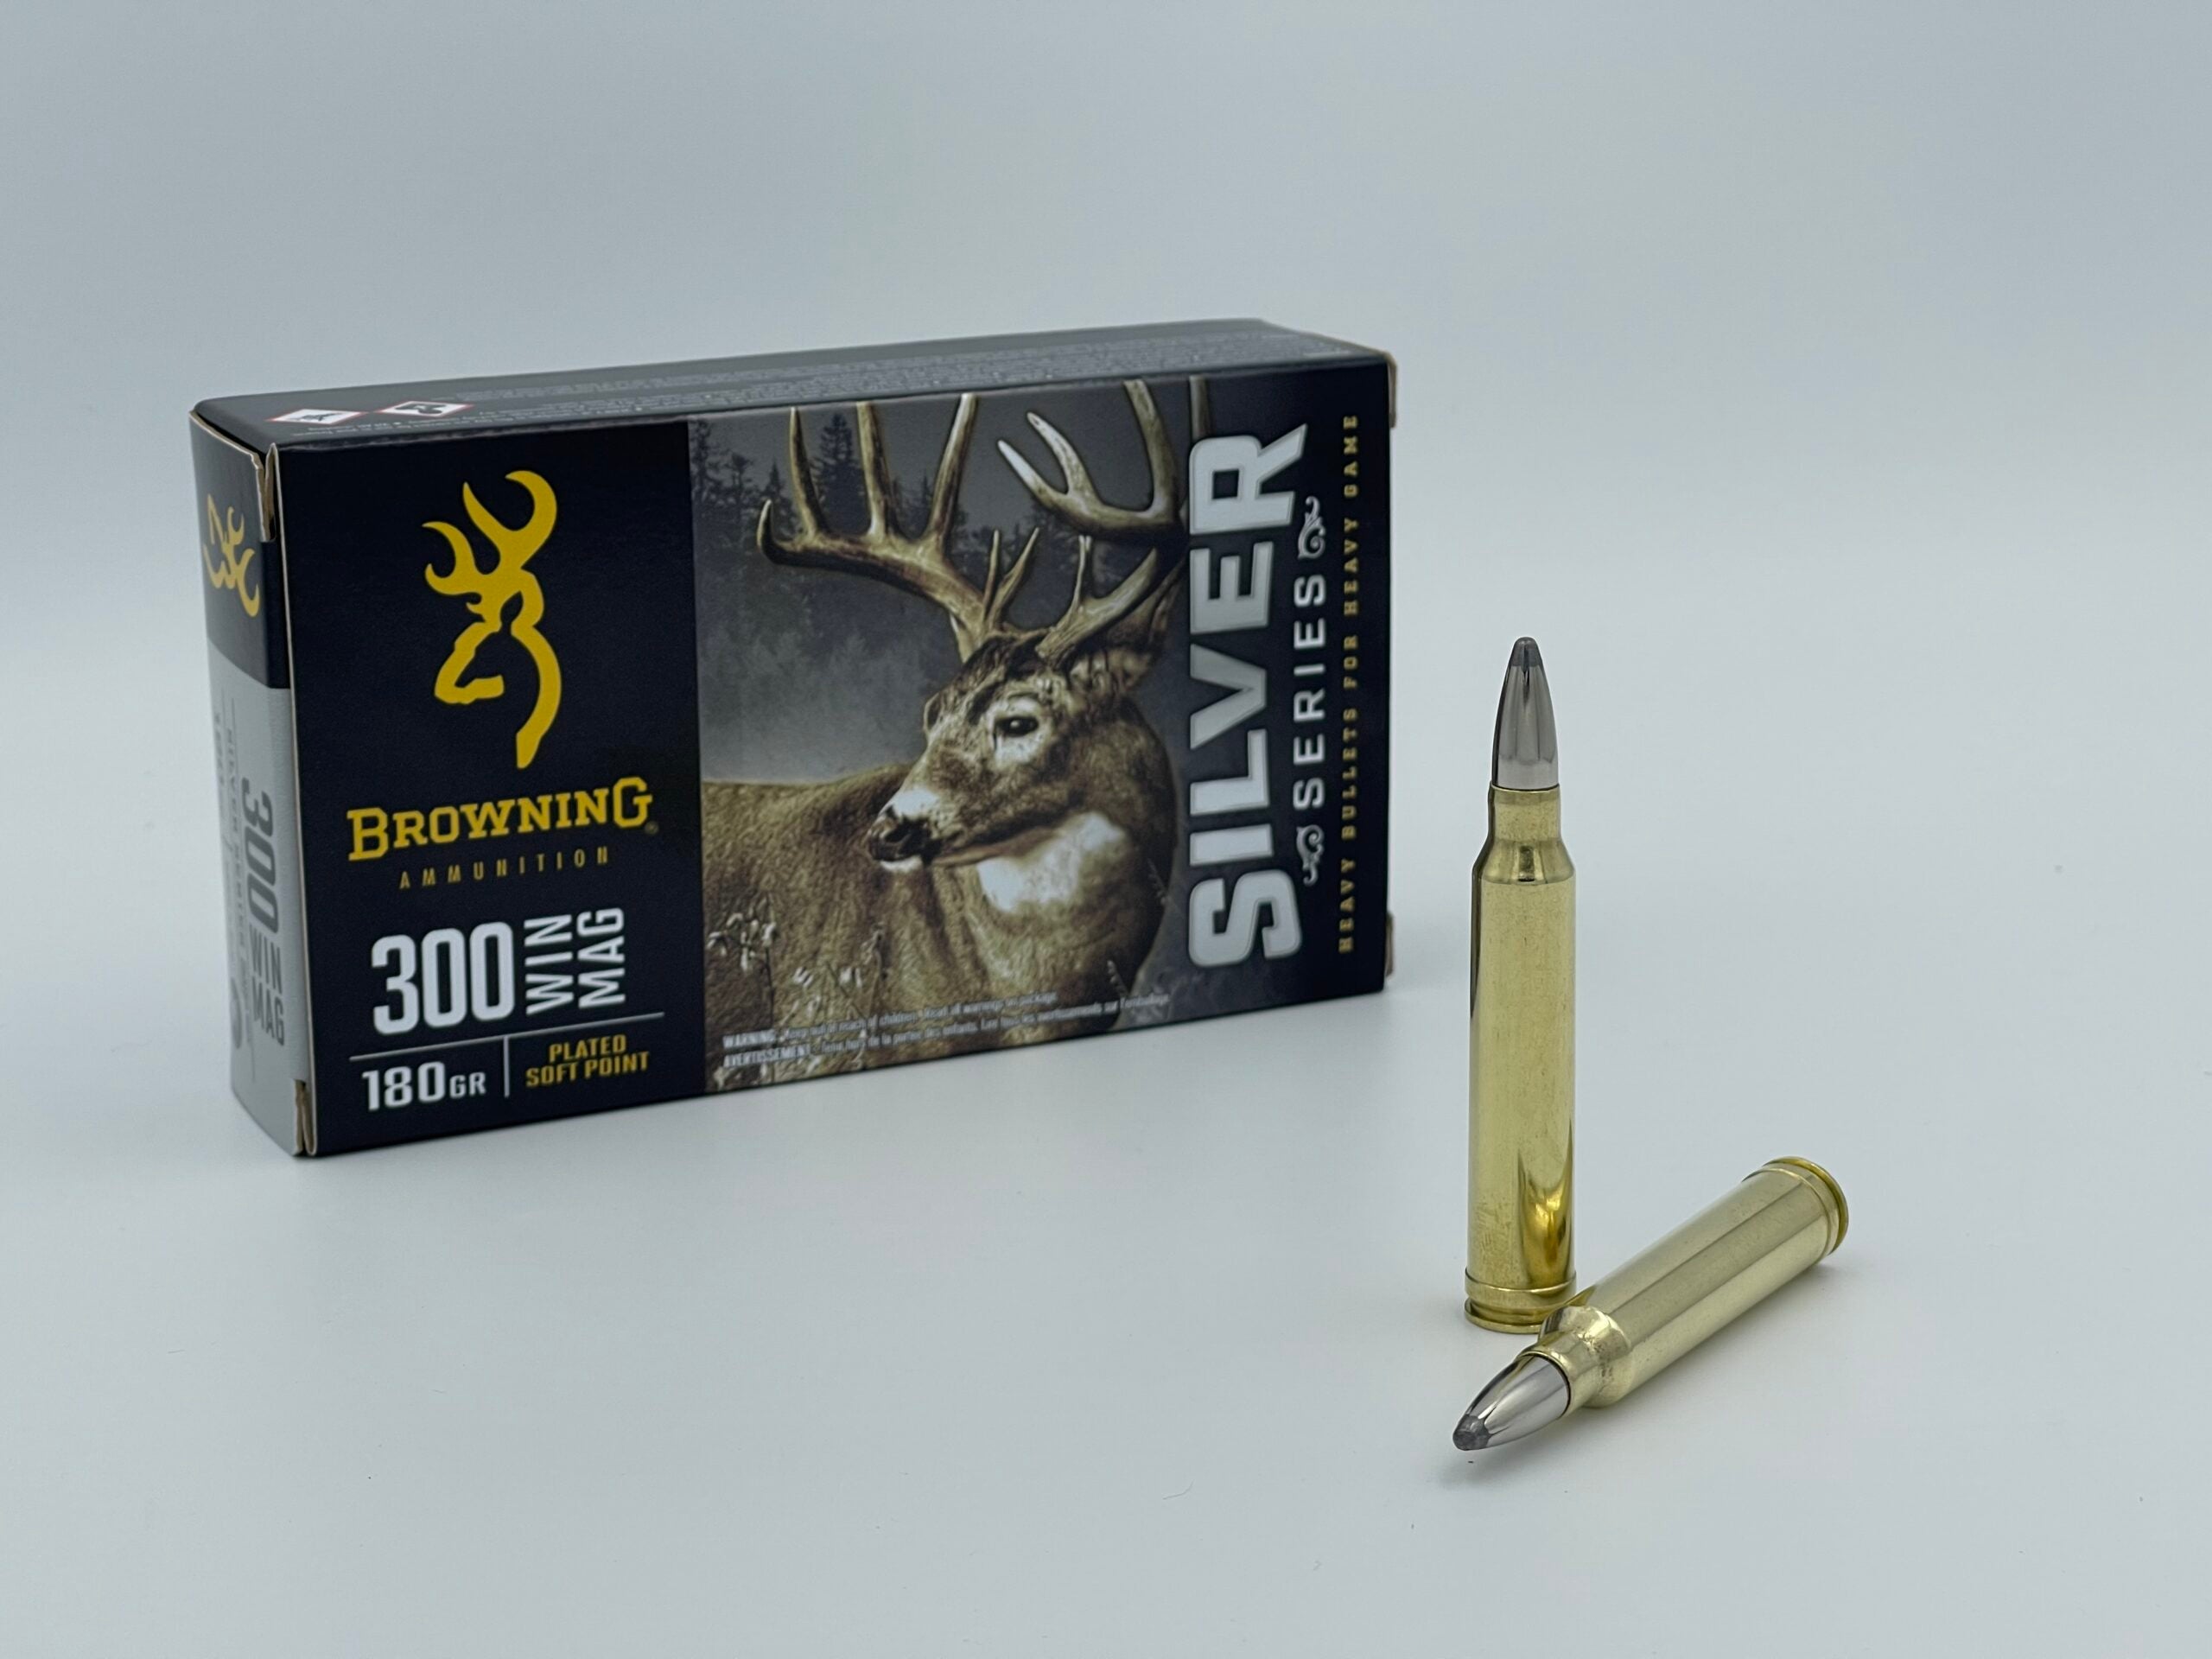 Browning Silver Series ammo 